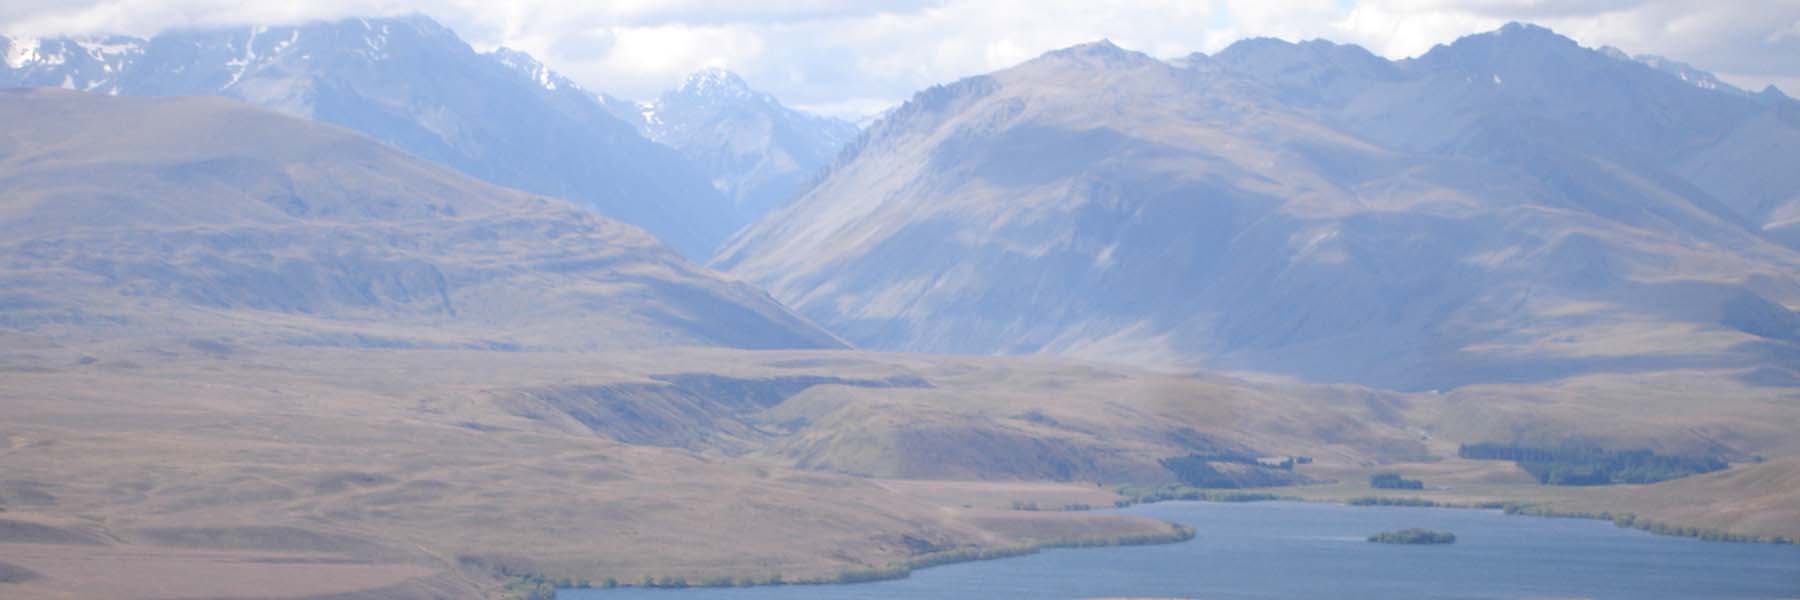 New Zealand's Lake Alexandrina backed by mountains, blue sky, and white clouds.